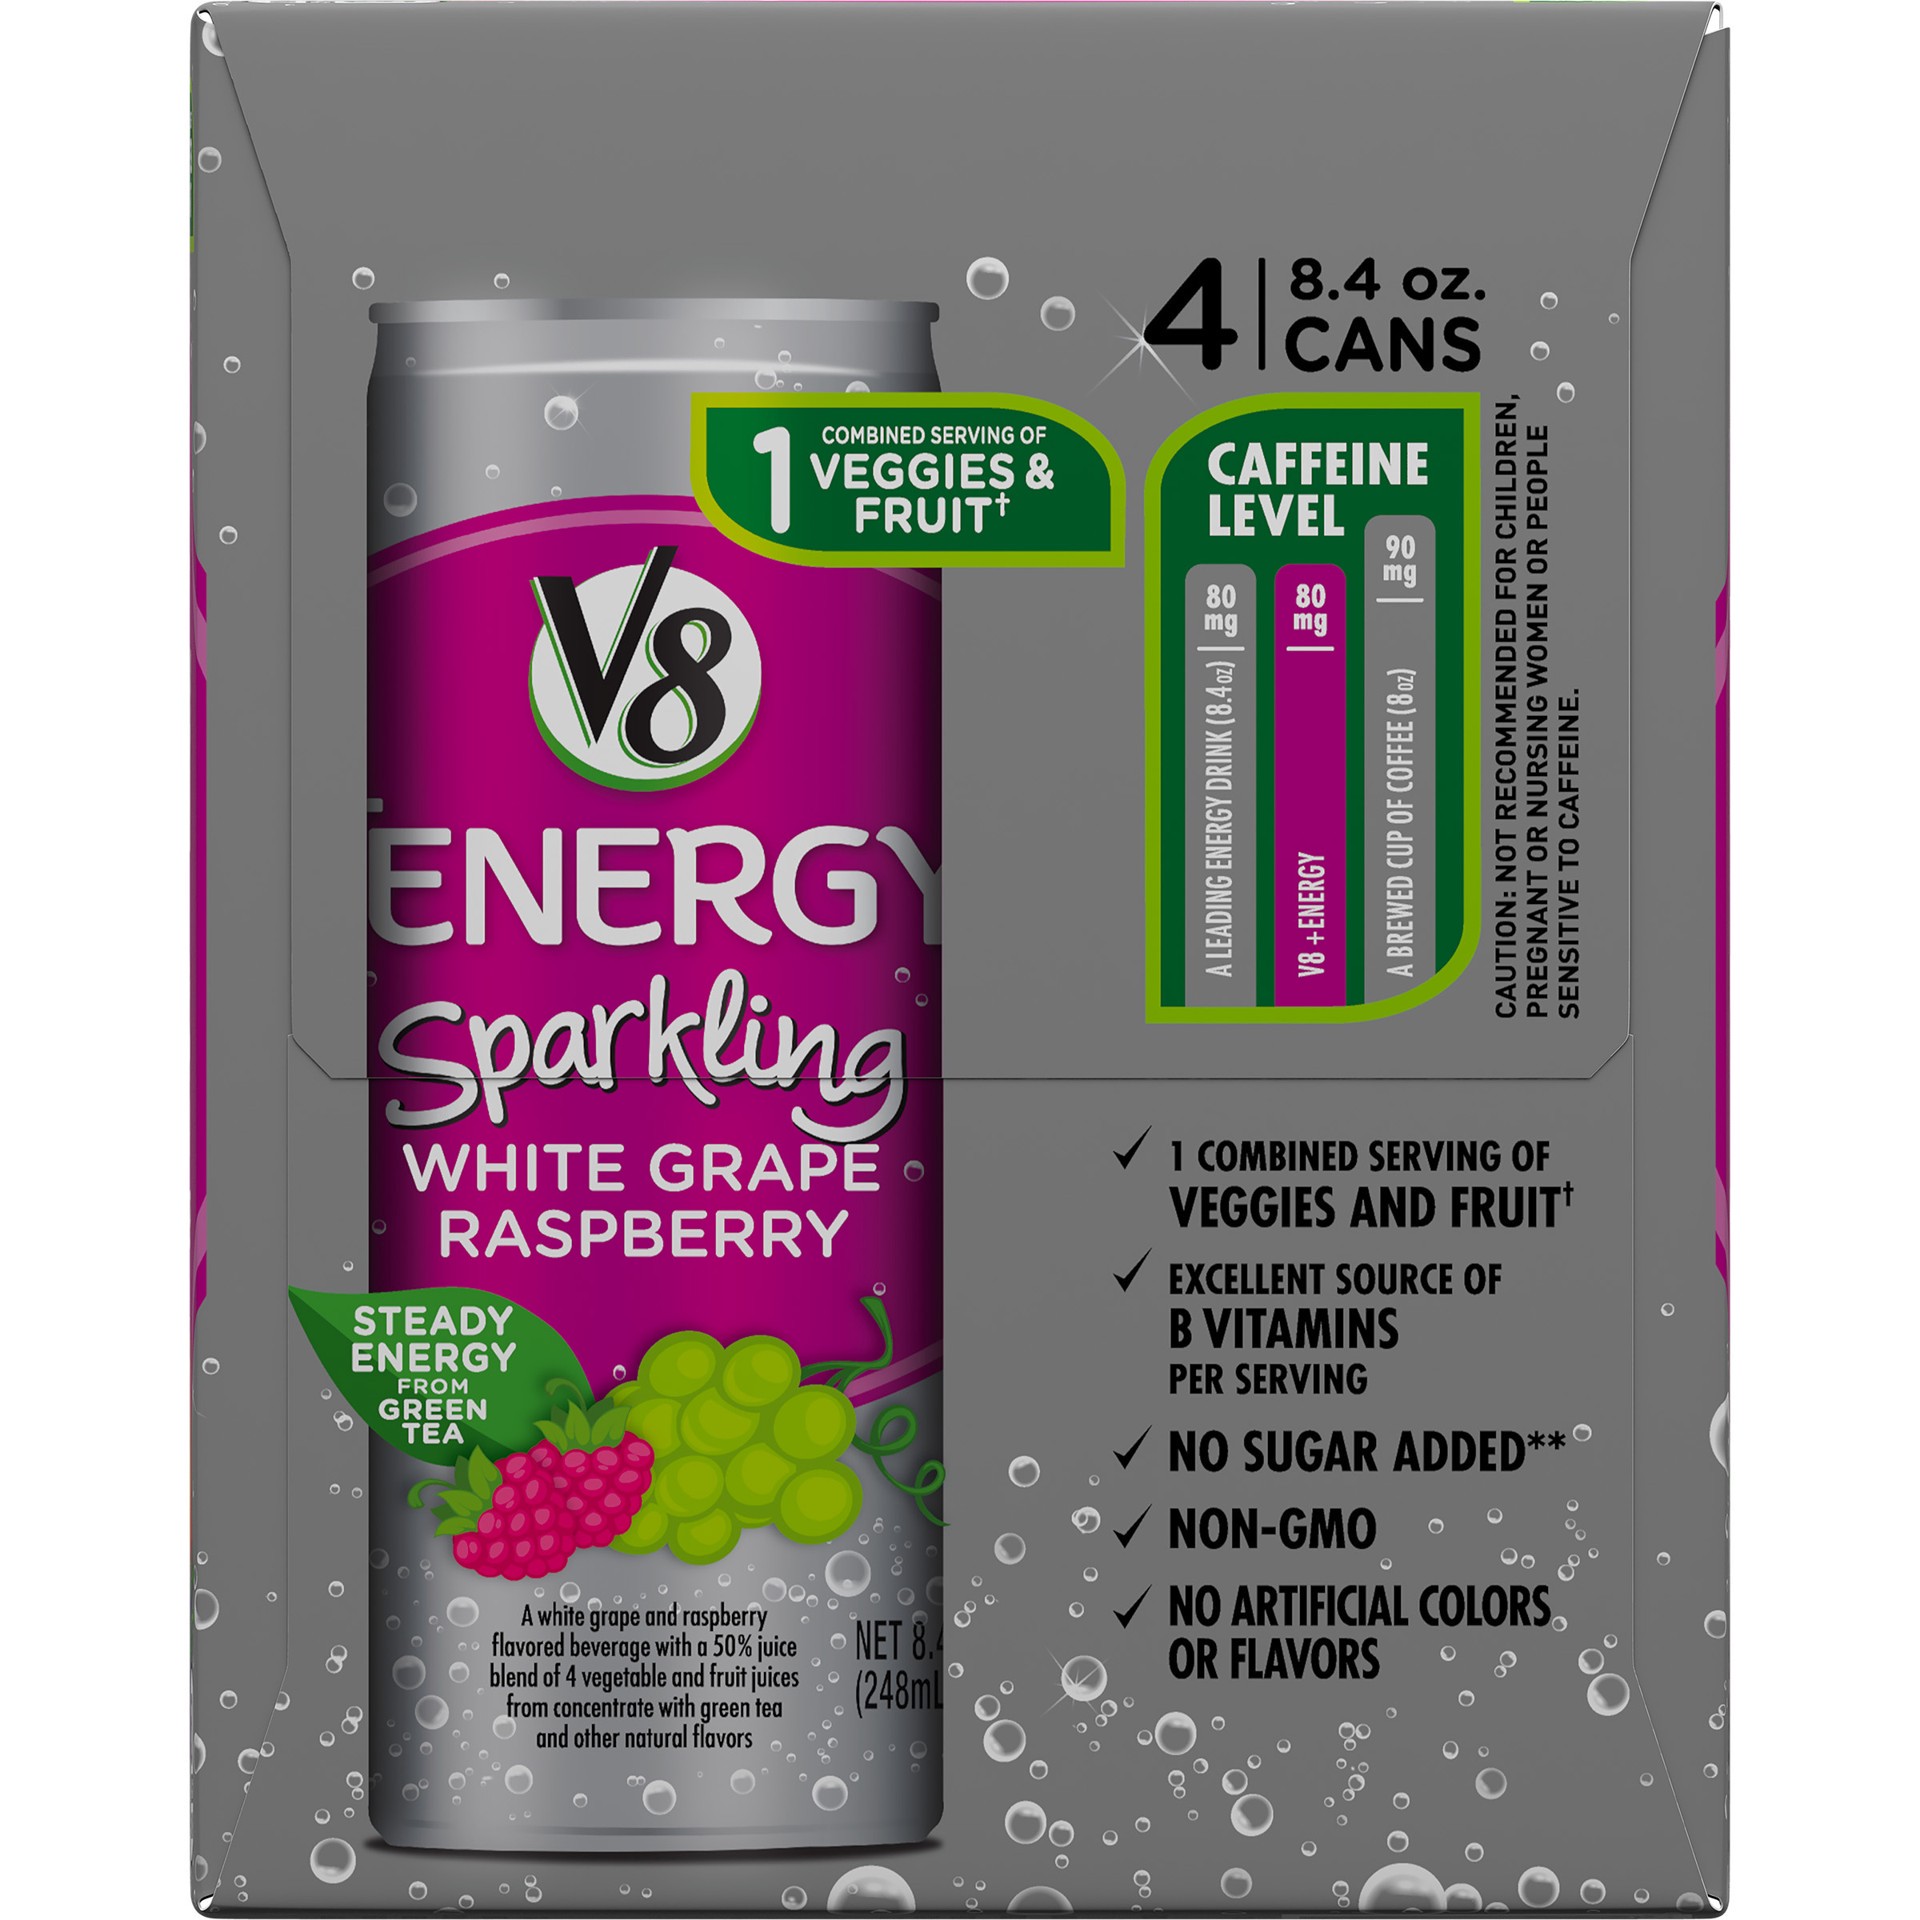 slide 2 of 5, V8 +Energy Sparkling Healthy Energy Drink, Natural Energy from Tea, White Grape Raspberry, 8.4 Oz Can (4 Count), 33.6 oz